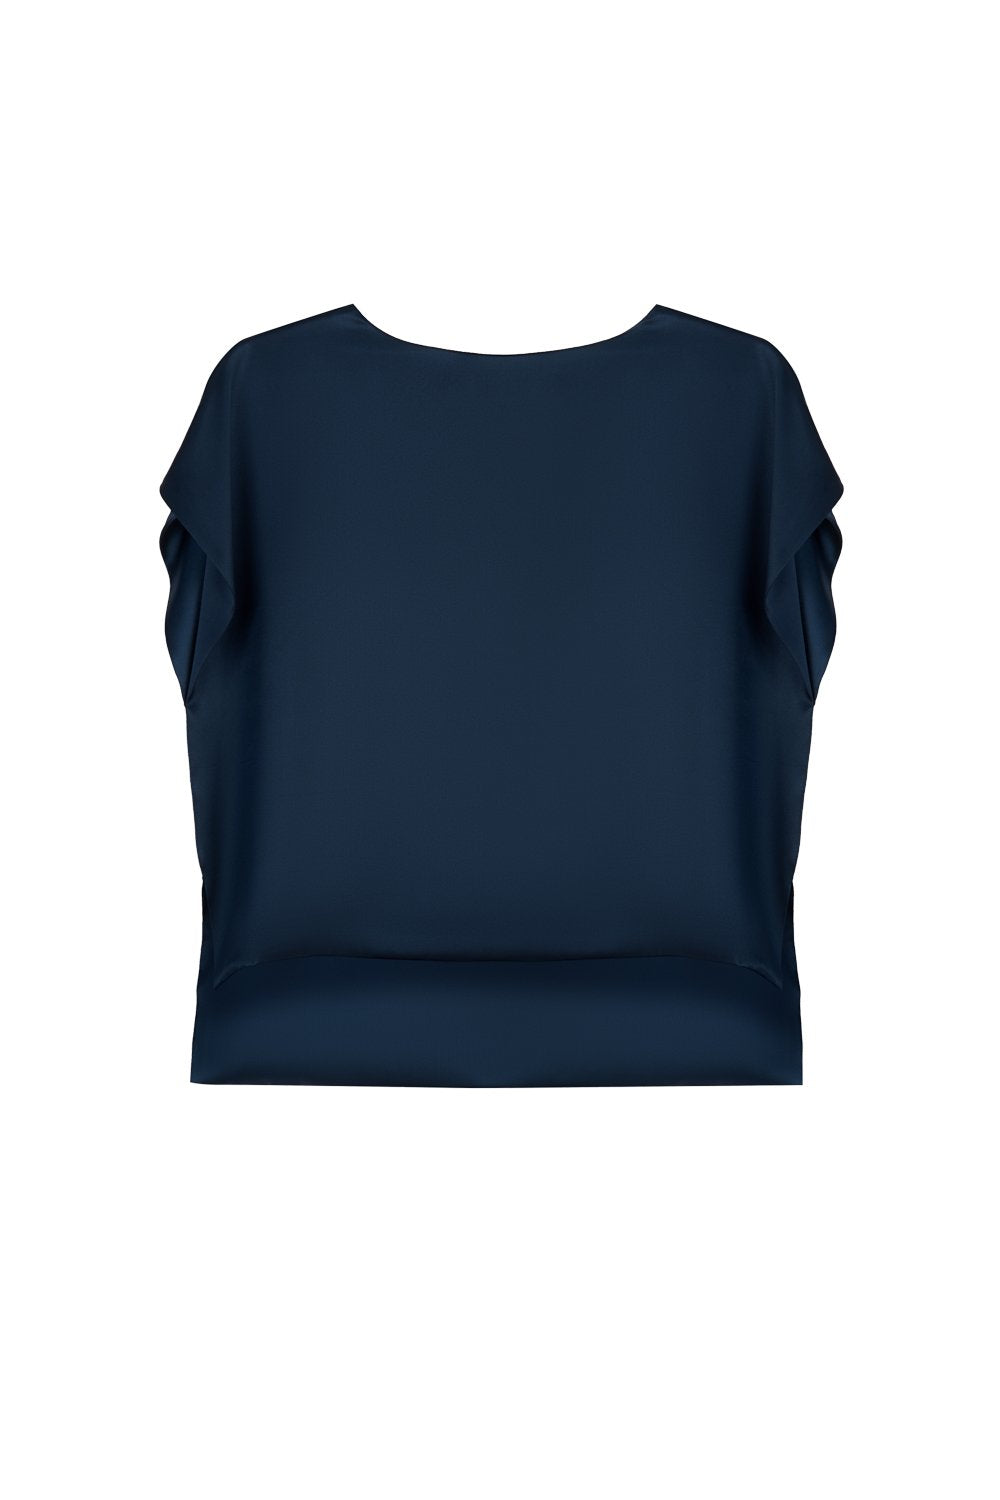 Flowing Silk Blouse in Navy Blue - New Prolonged Edition - silk&jam